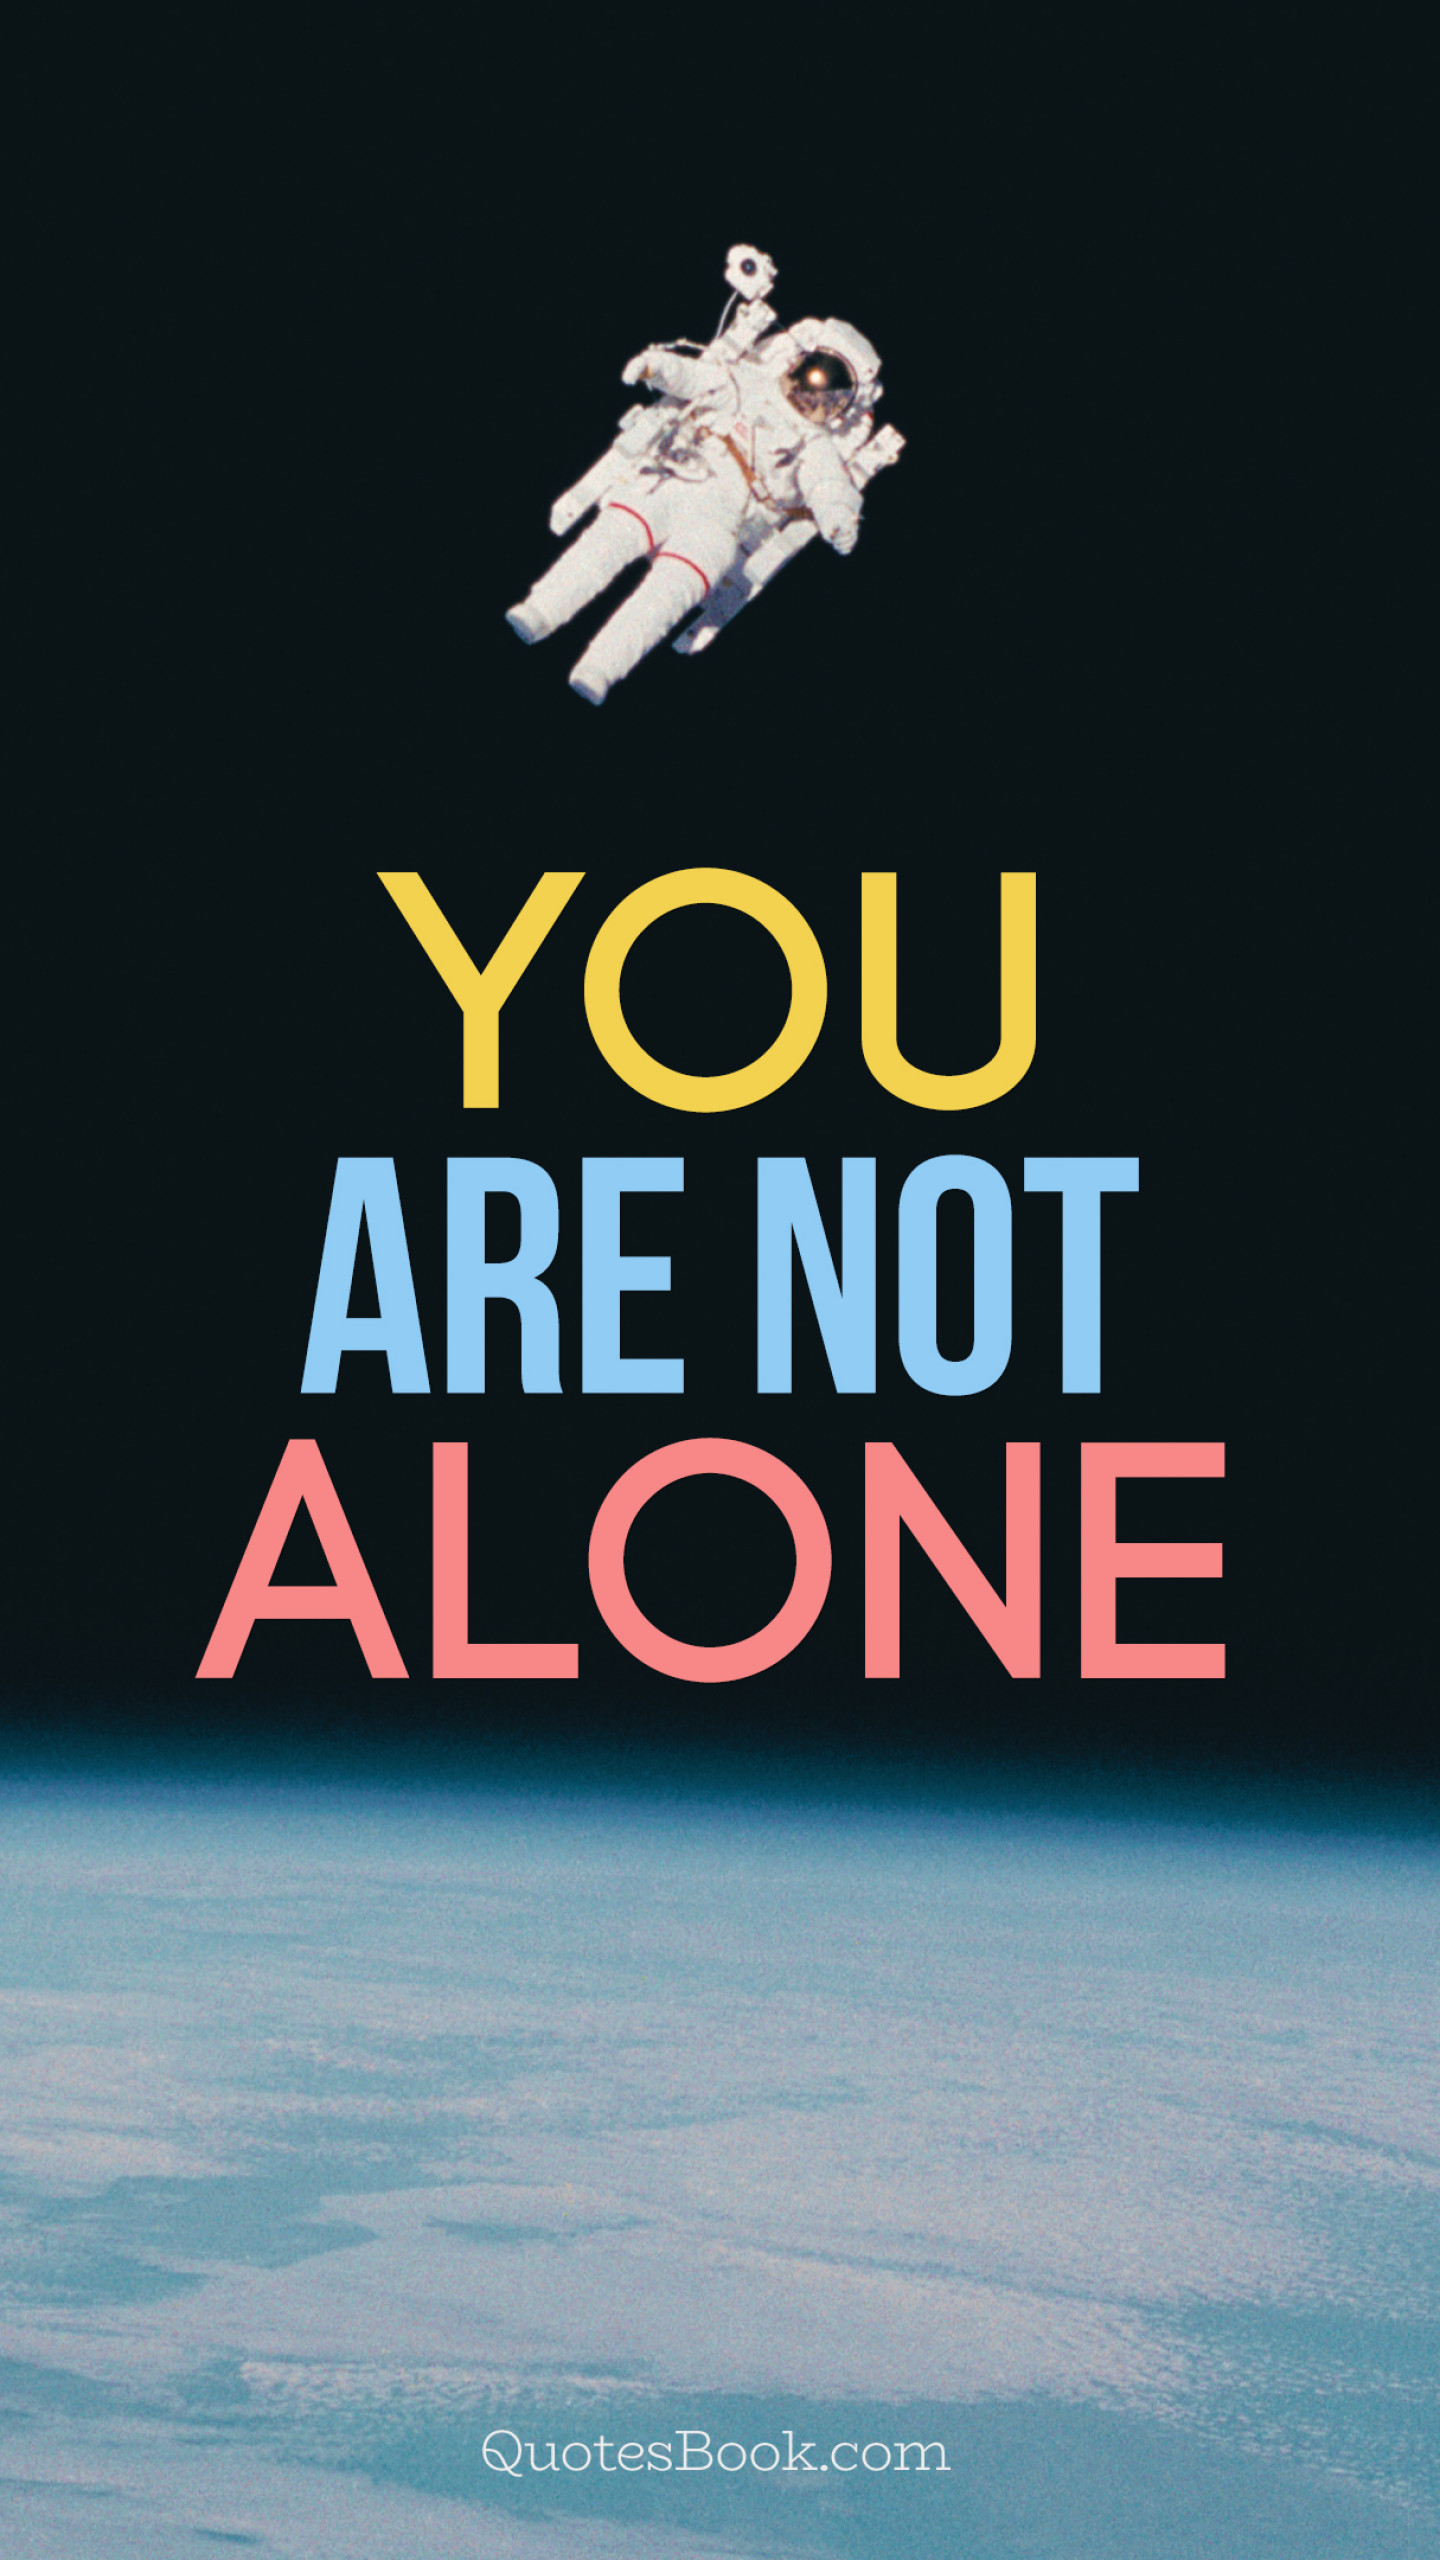 You Are Not Alone - QuotesBook